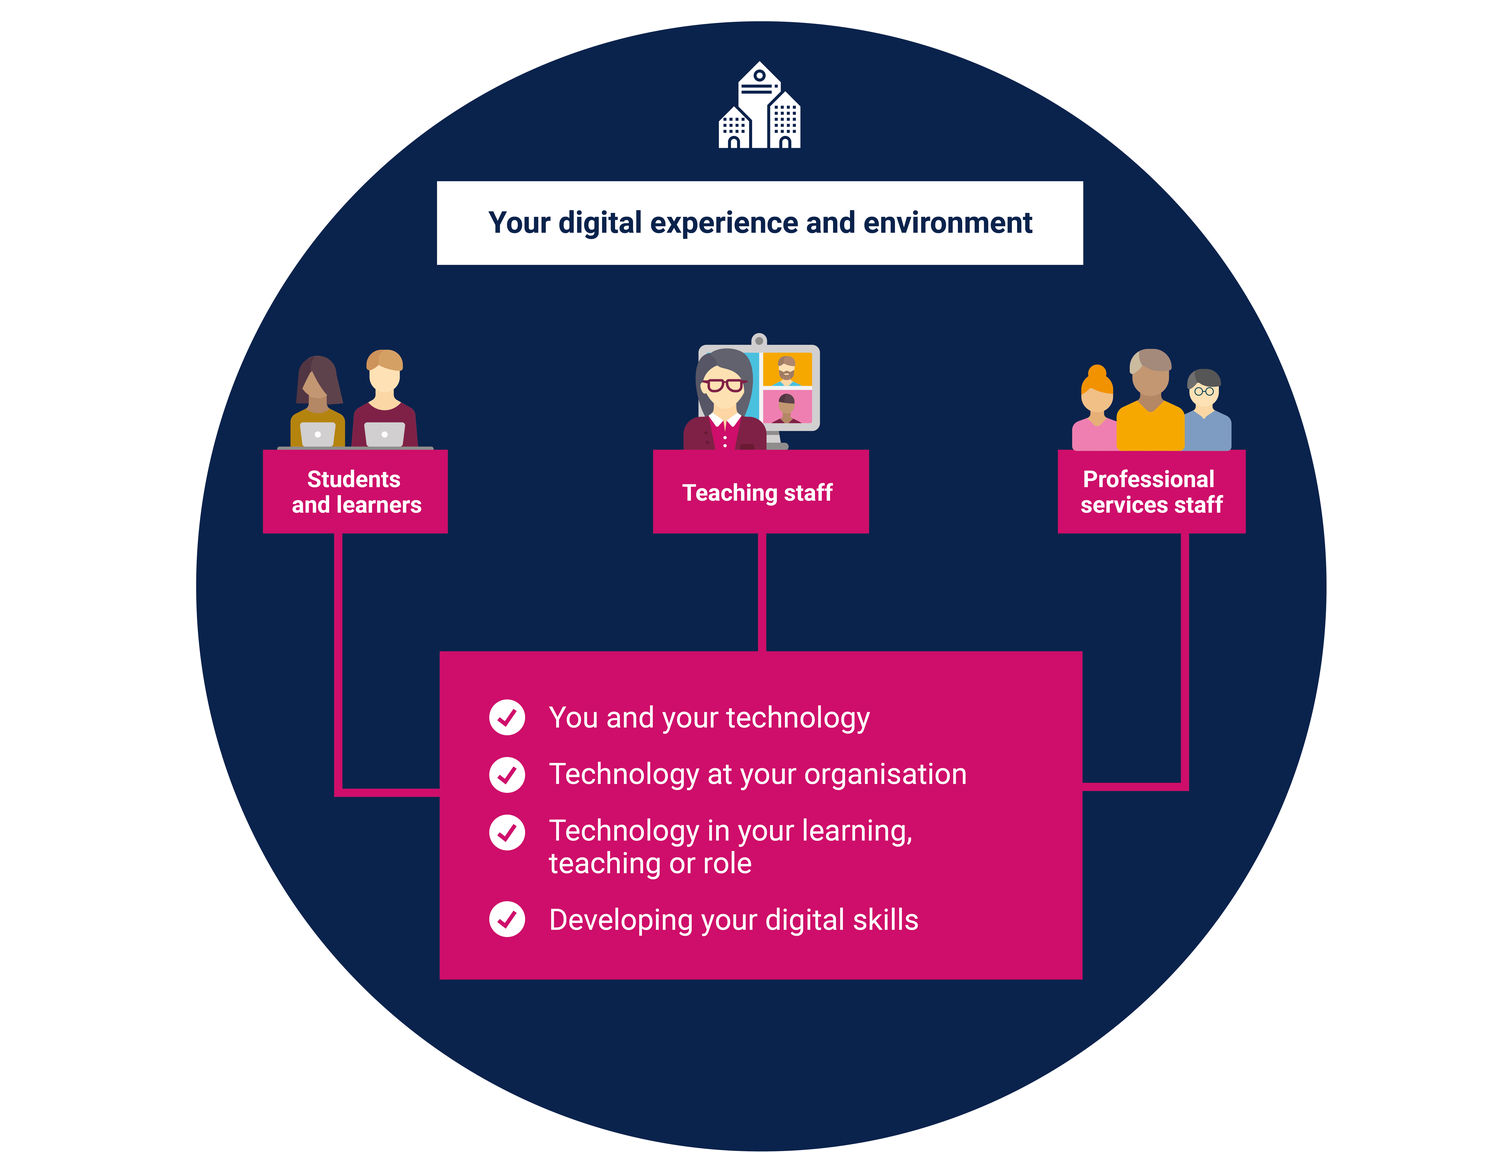 GRJisc00058_Digital experience and environment infographic PROOF GR